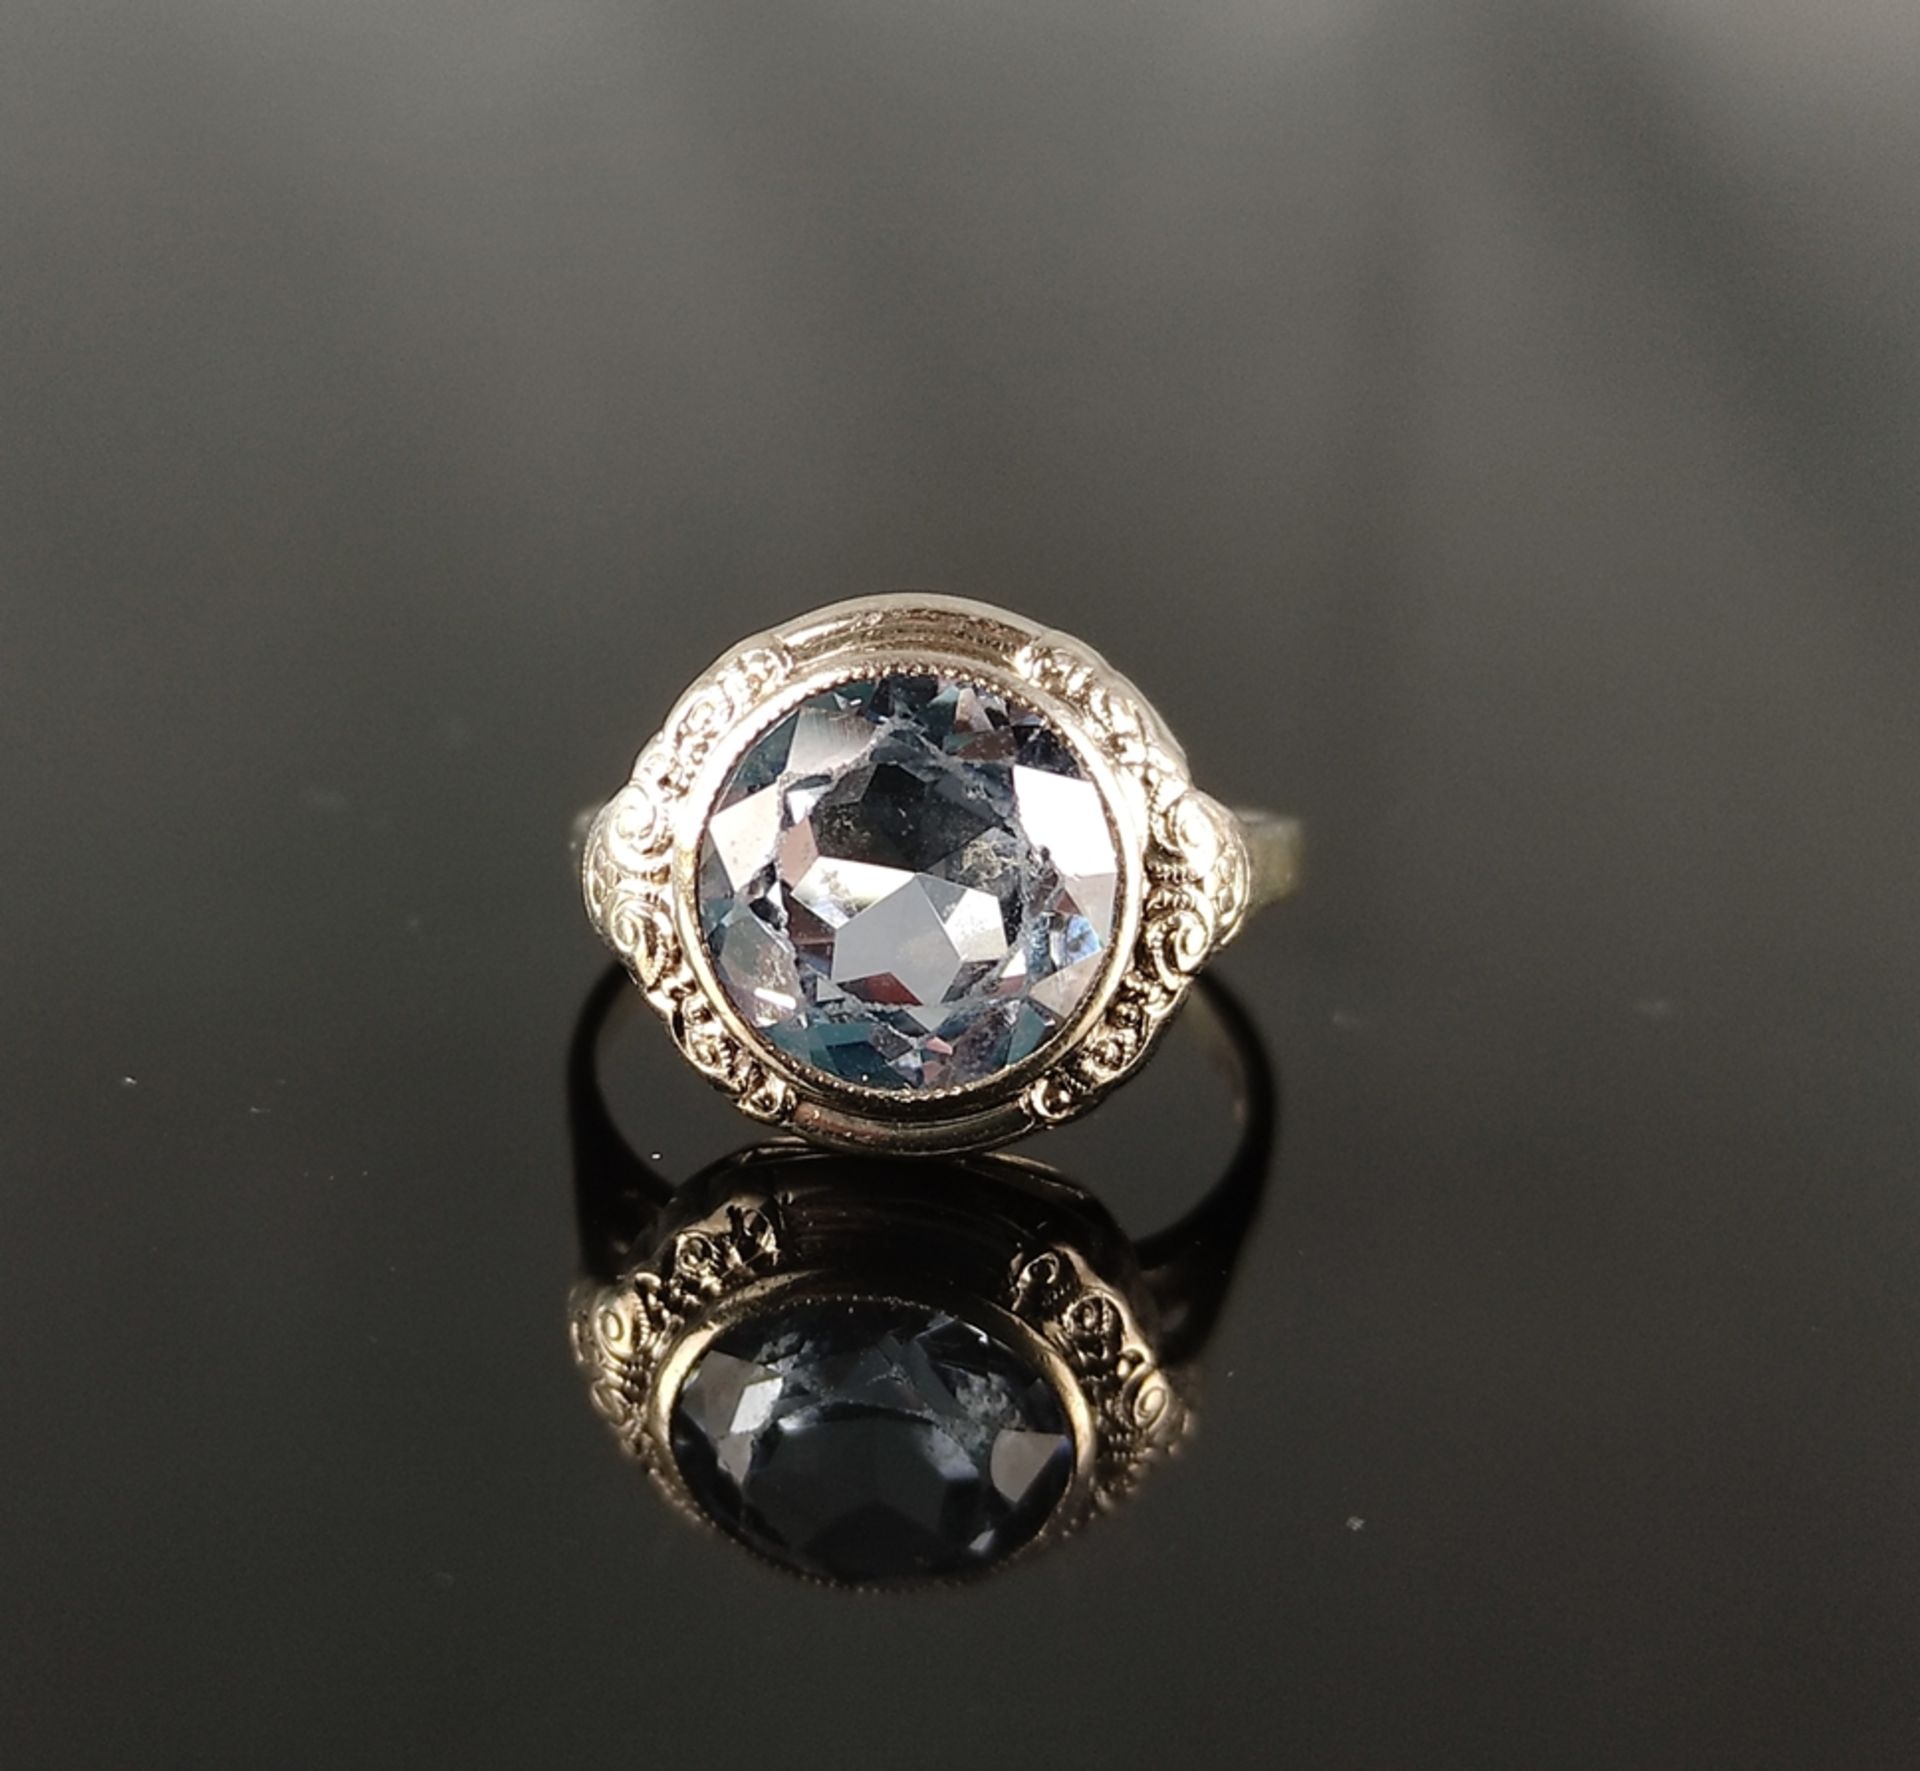 Art-Déco ring set with a round faceted aquamarine spinel in stepped border surrounded by relief orn - Image 2 of 4